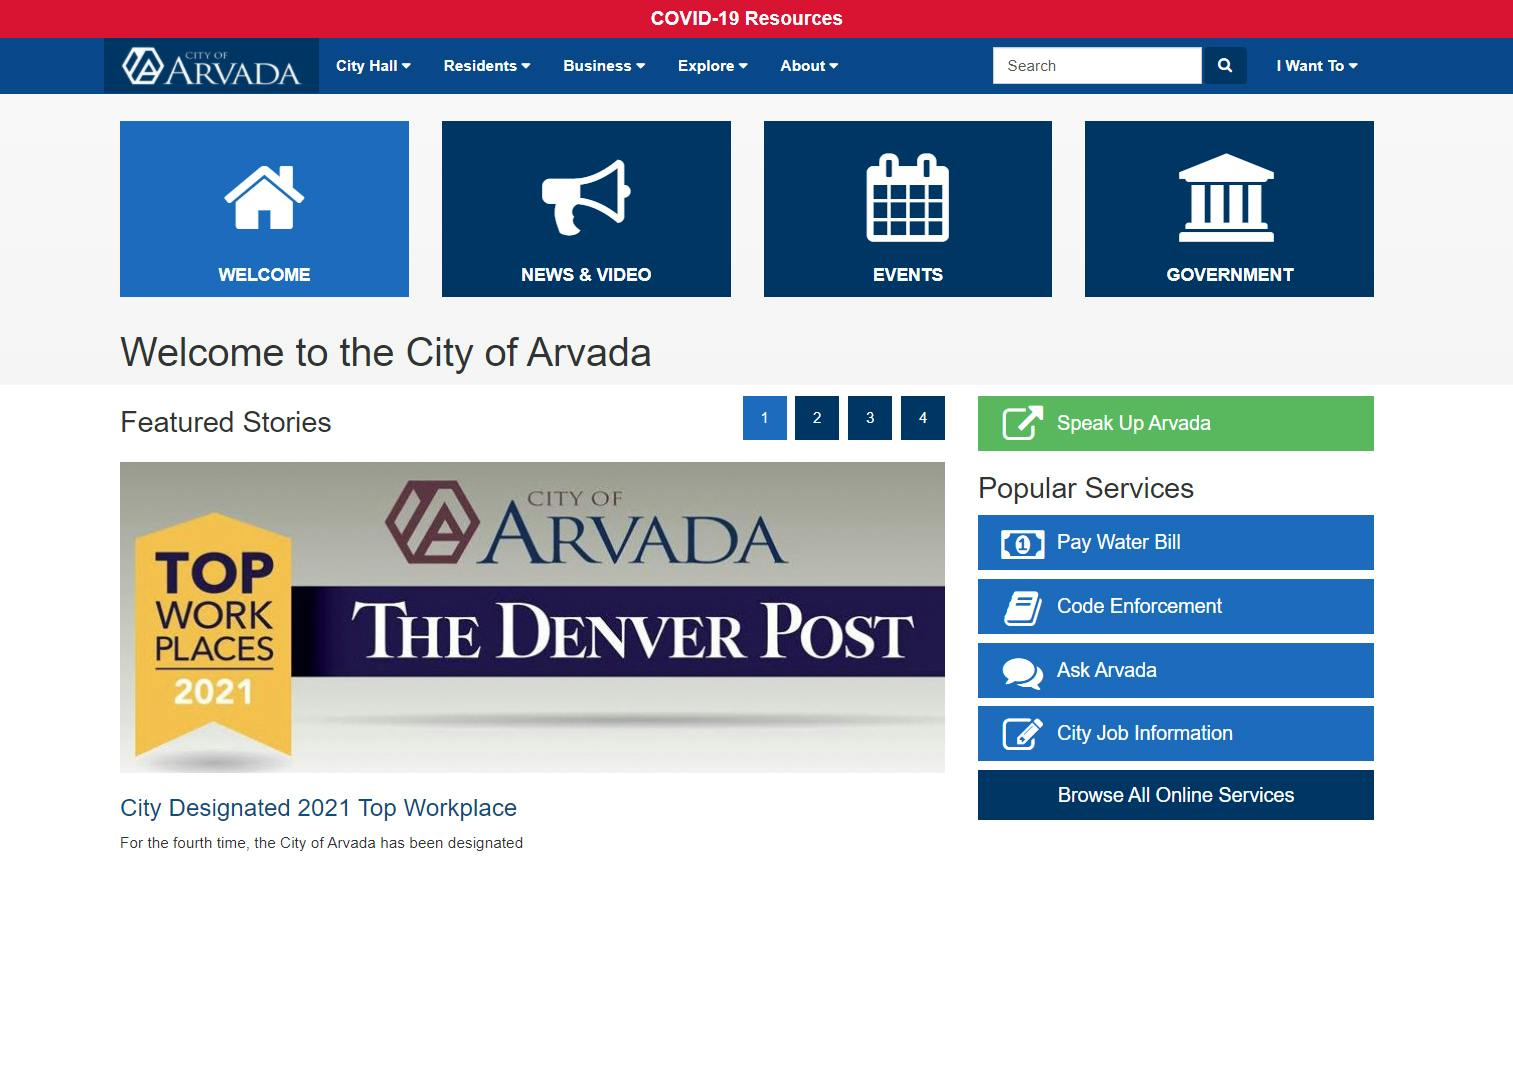 Arvada.org in 2021